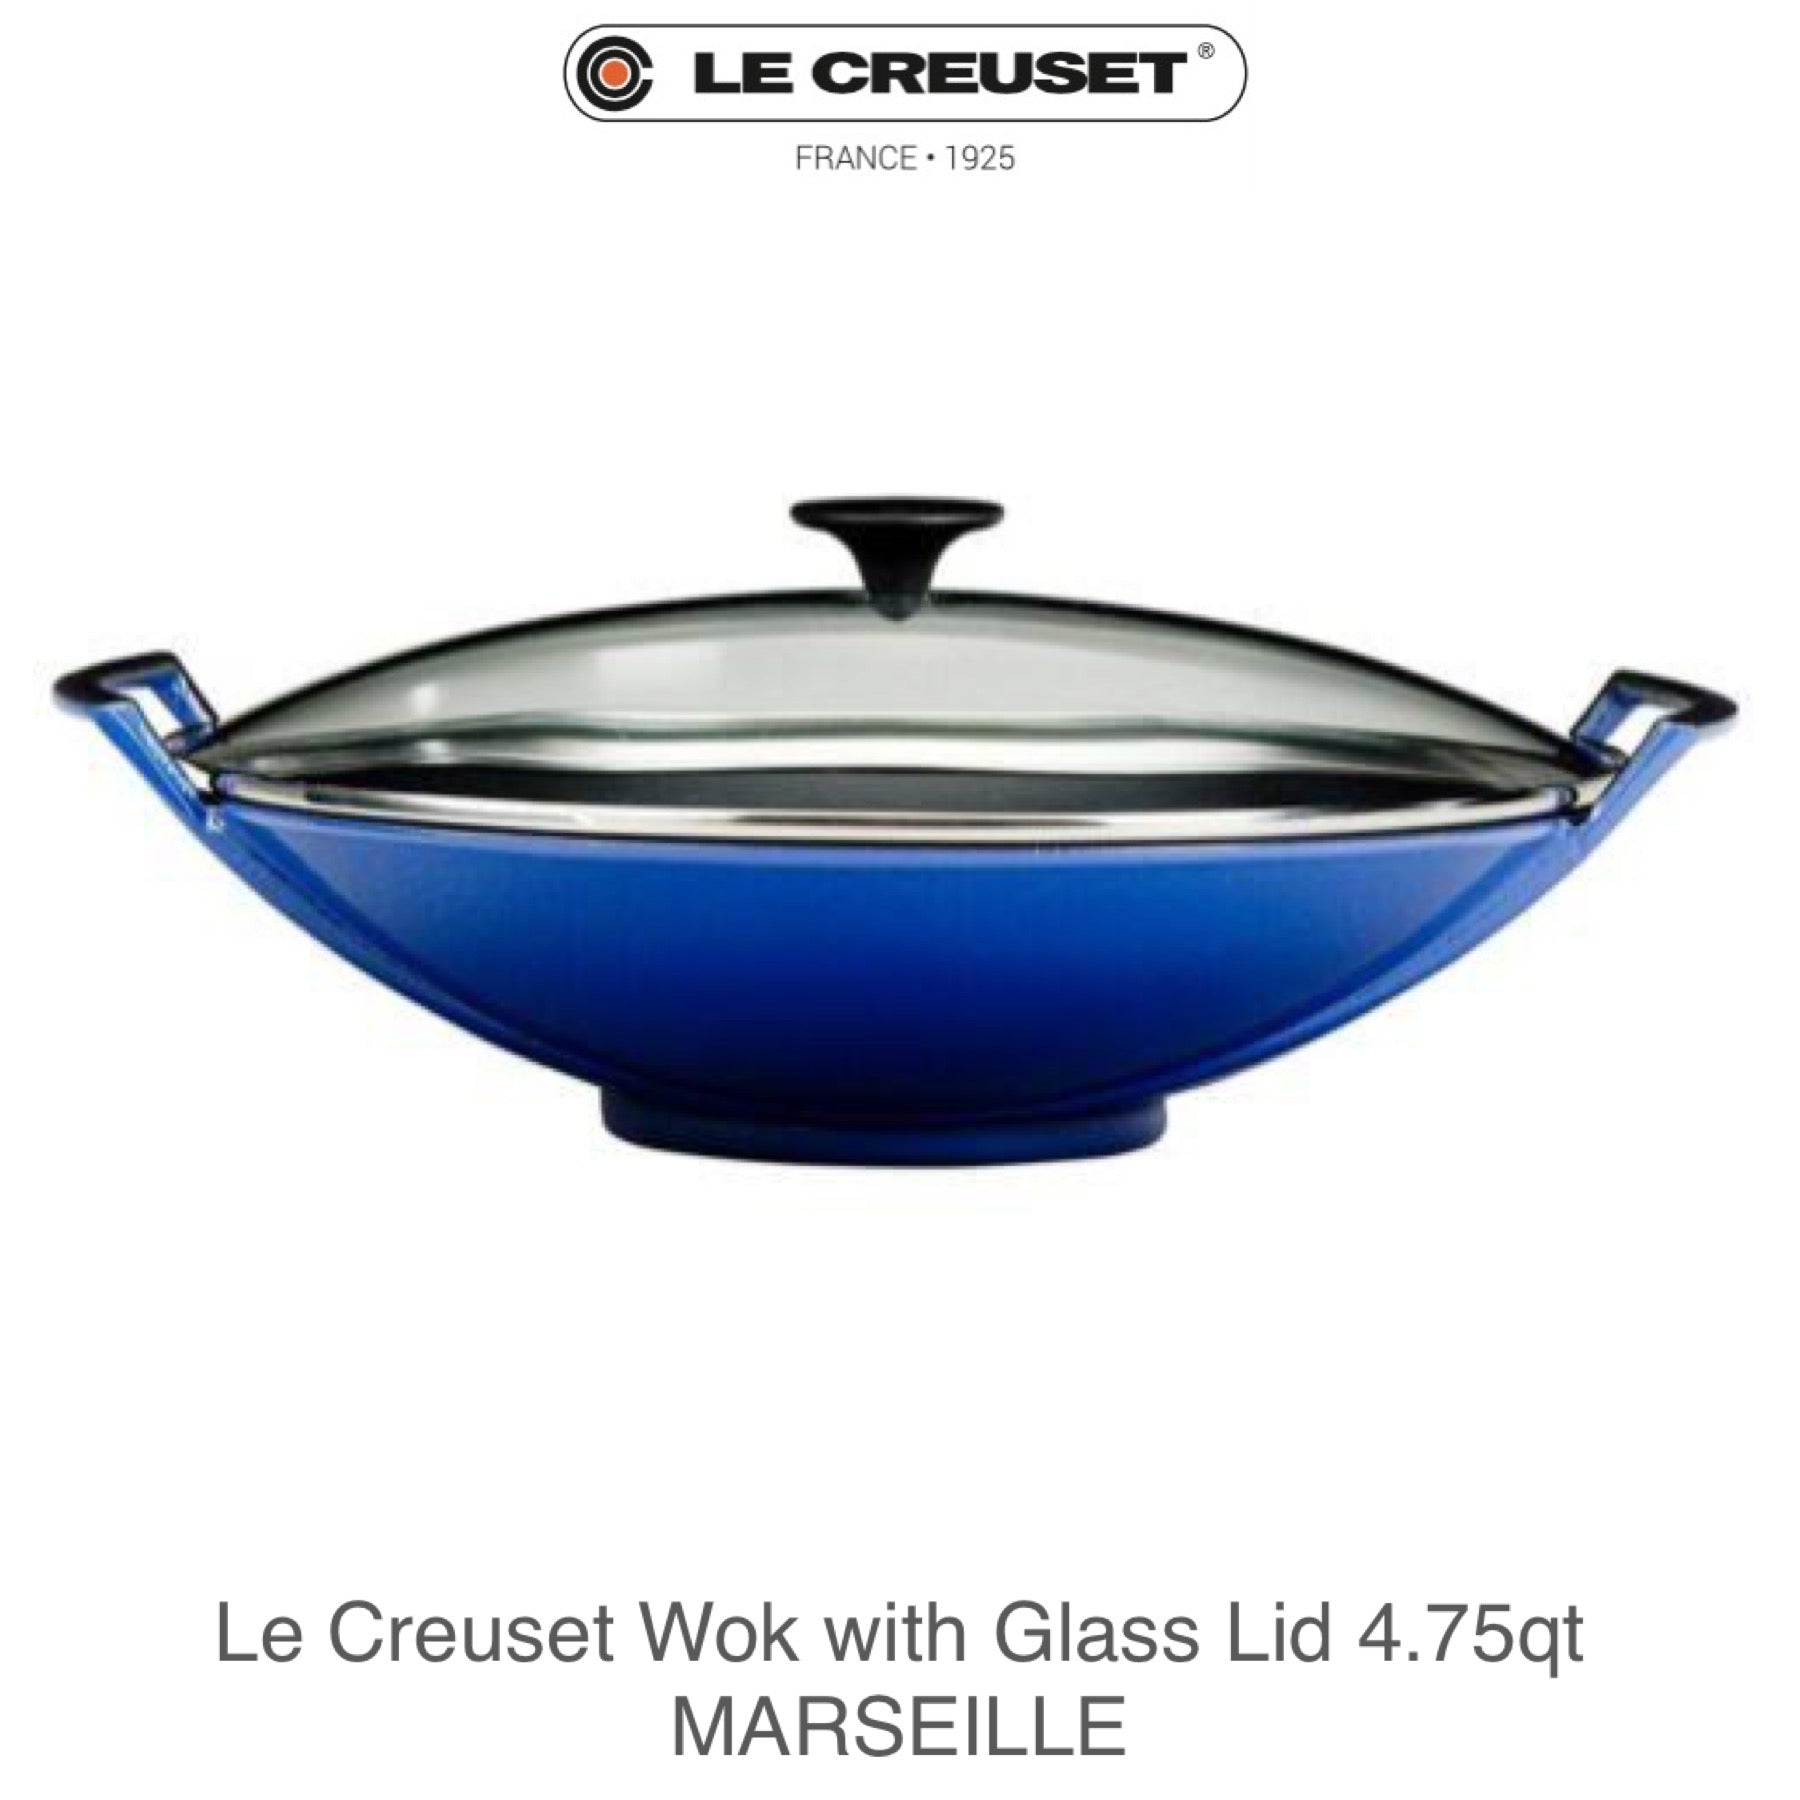 Le Creuset Enameled Cast-Iron 14-1/4-Inch Wok with Glass Lid, Color-Cherry